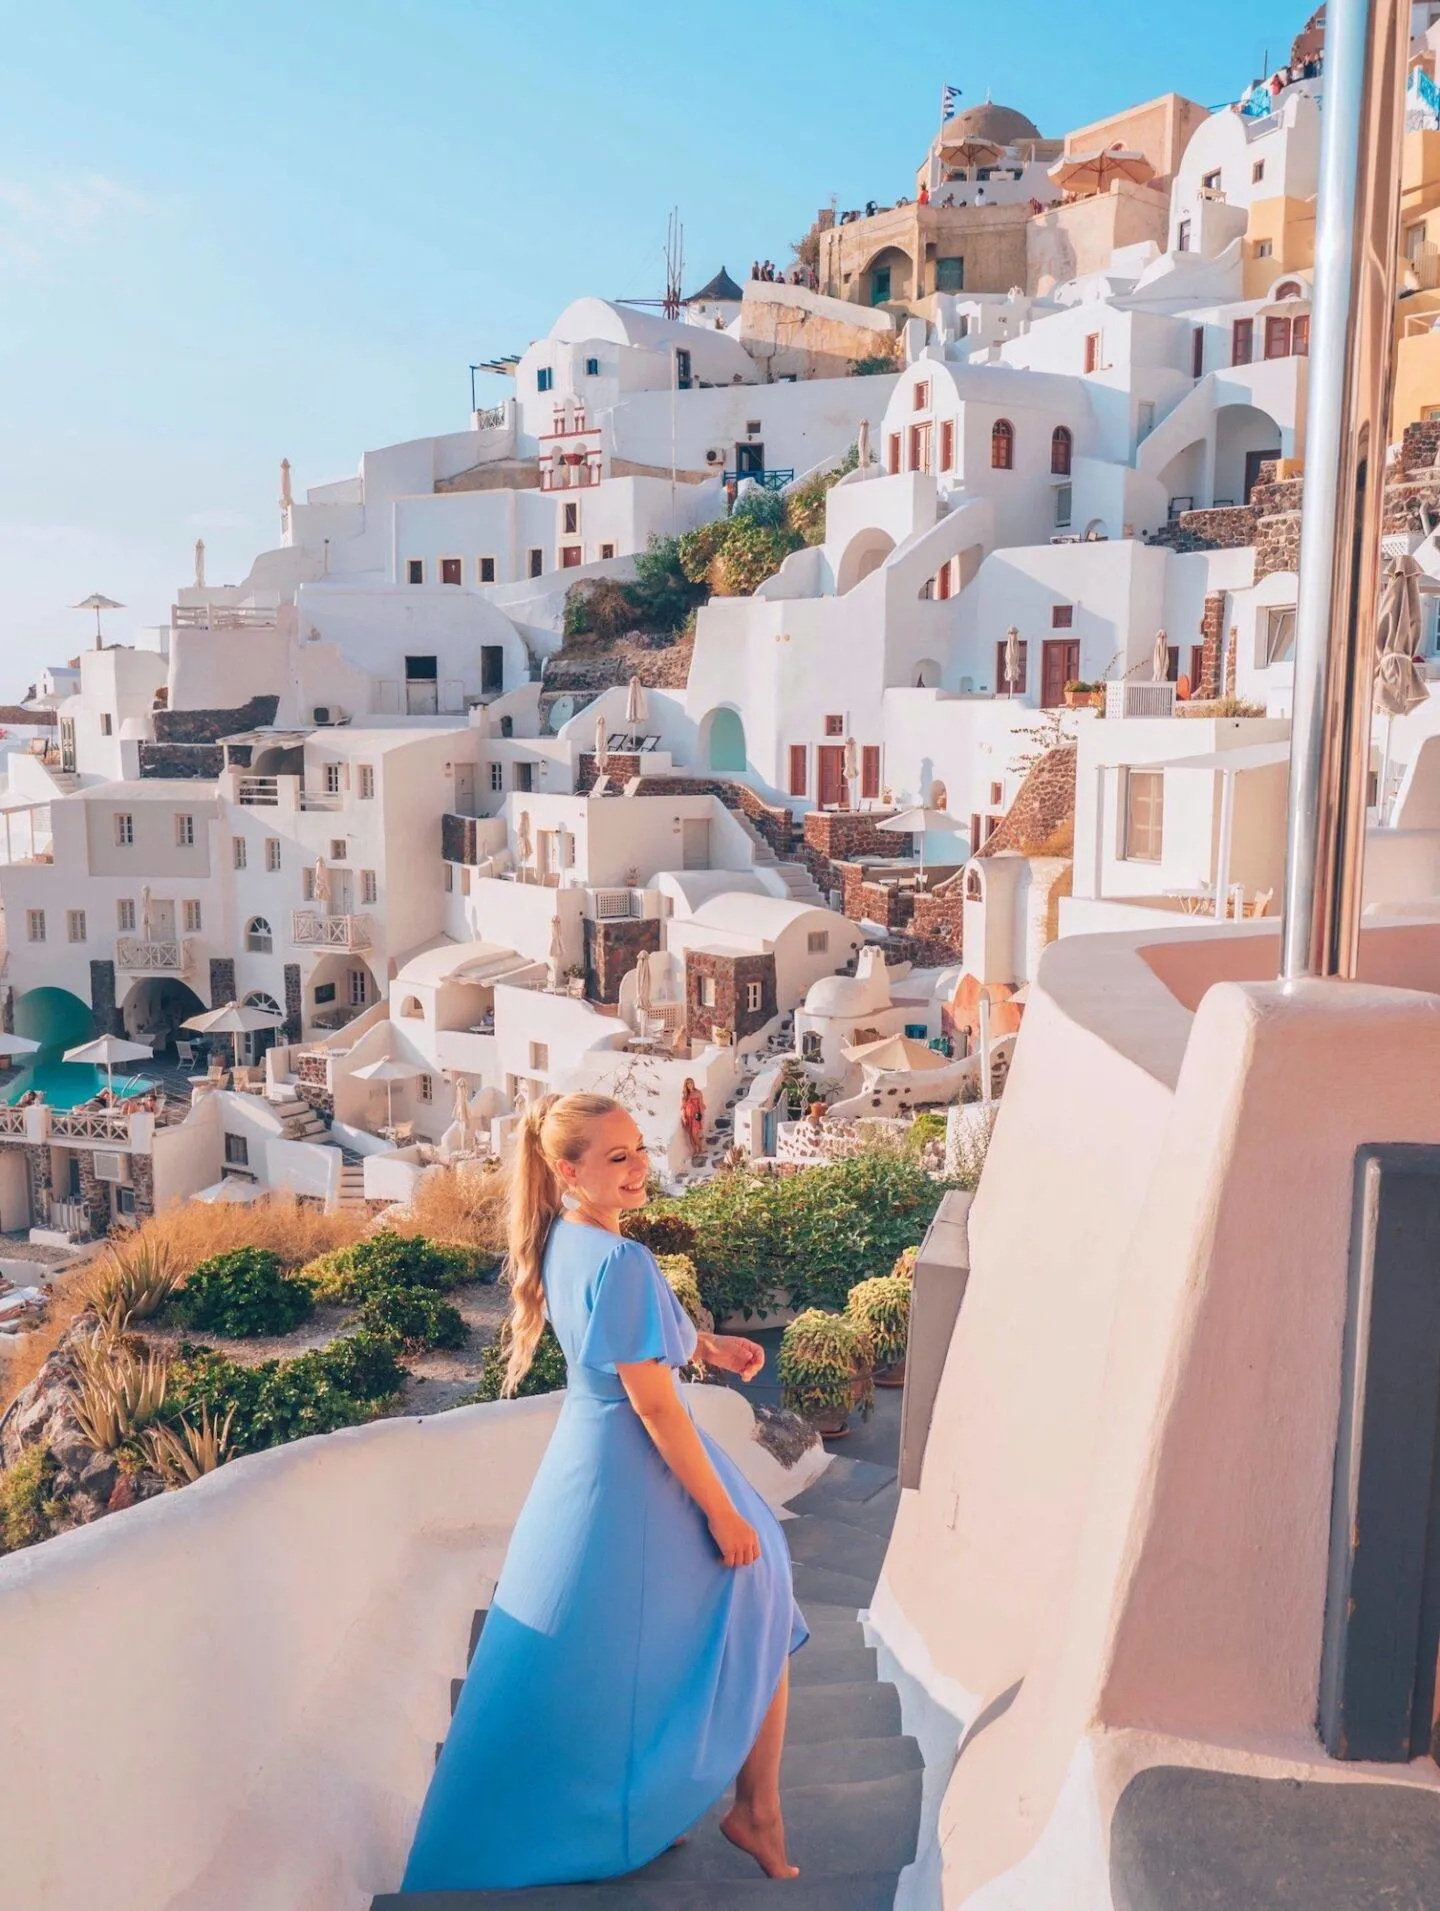 The best photo spots and most instagrammable places in Santorini: Oia Cliffside. Click the photo to see the rest of my list of the best instagram photo spots in Santorini!